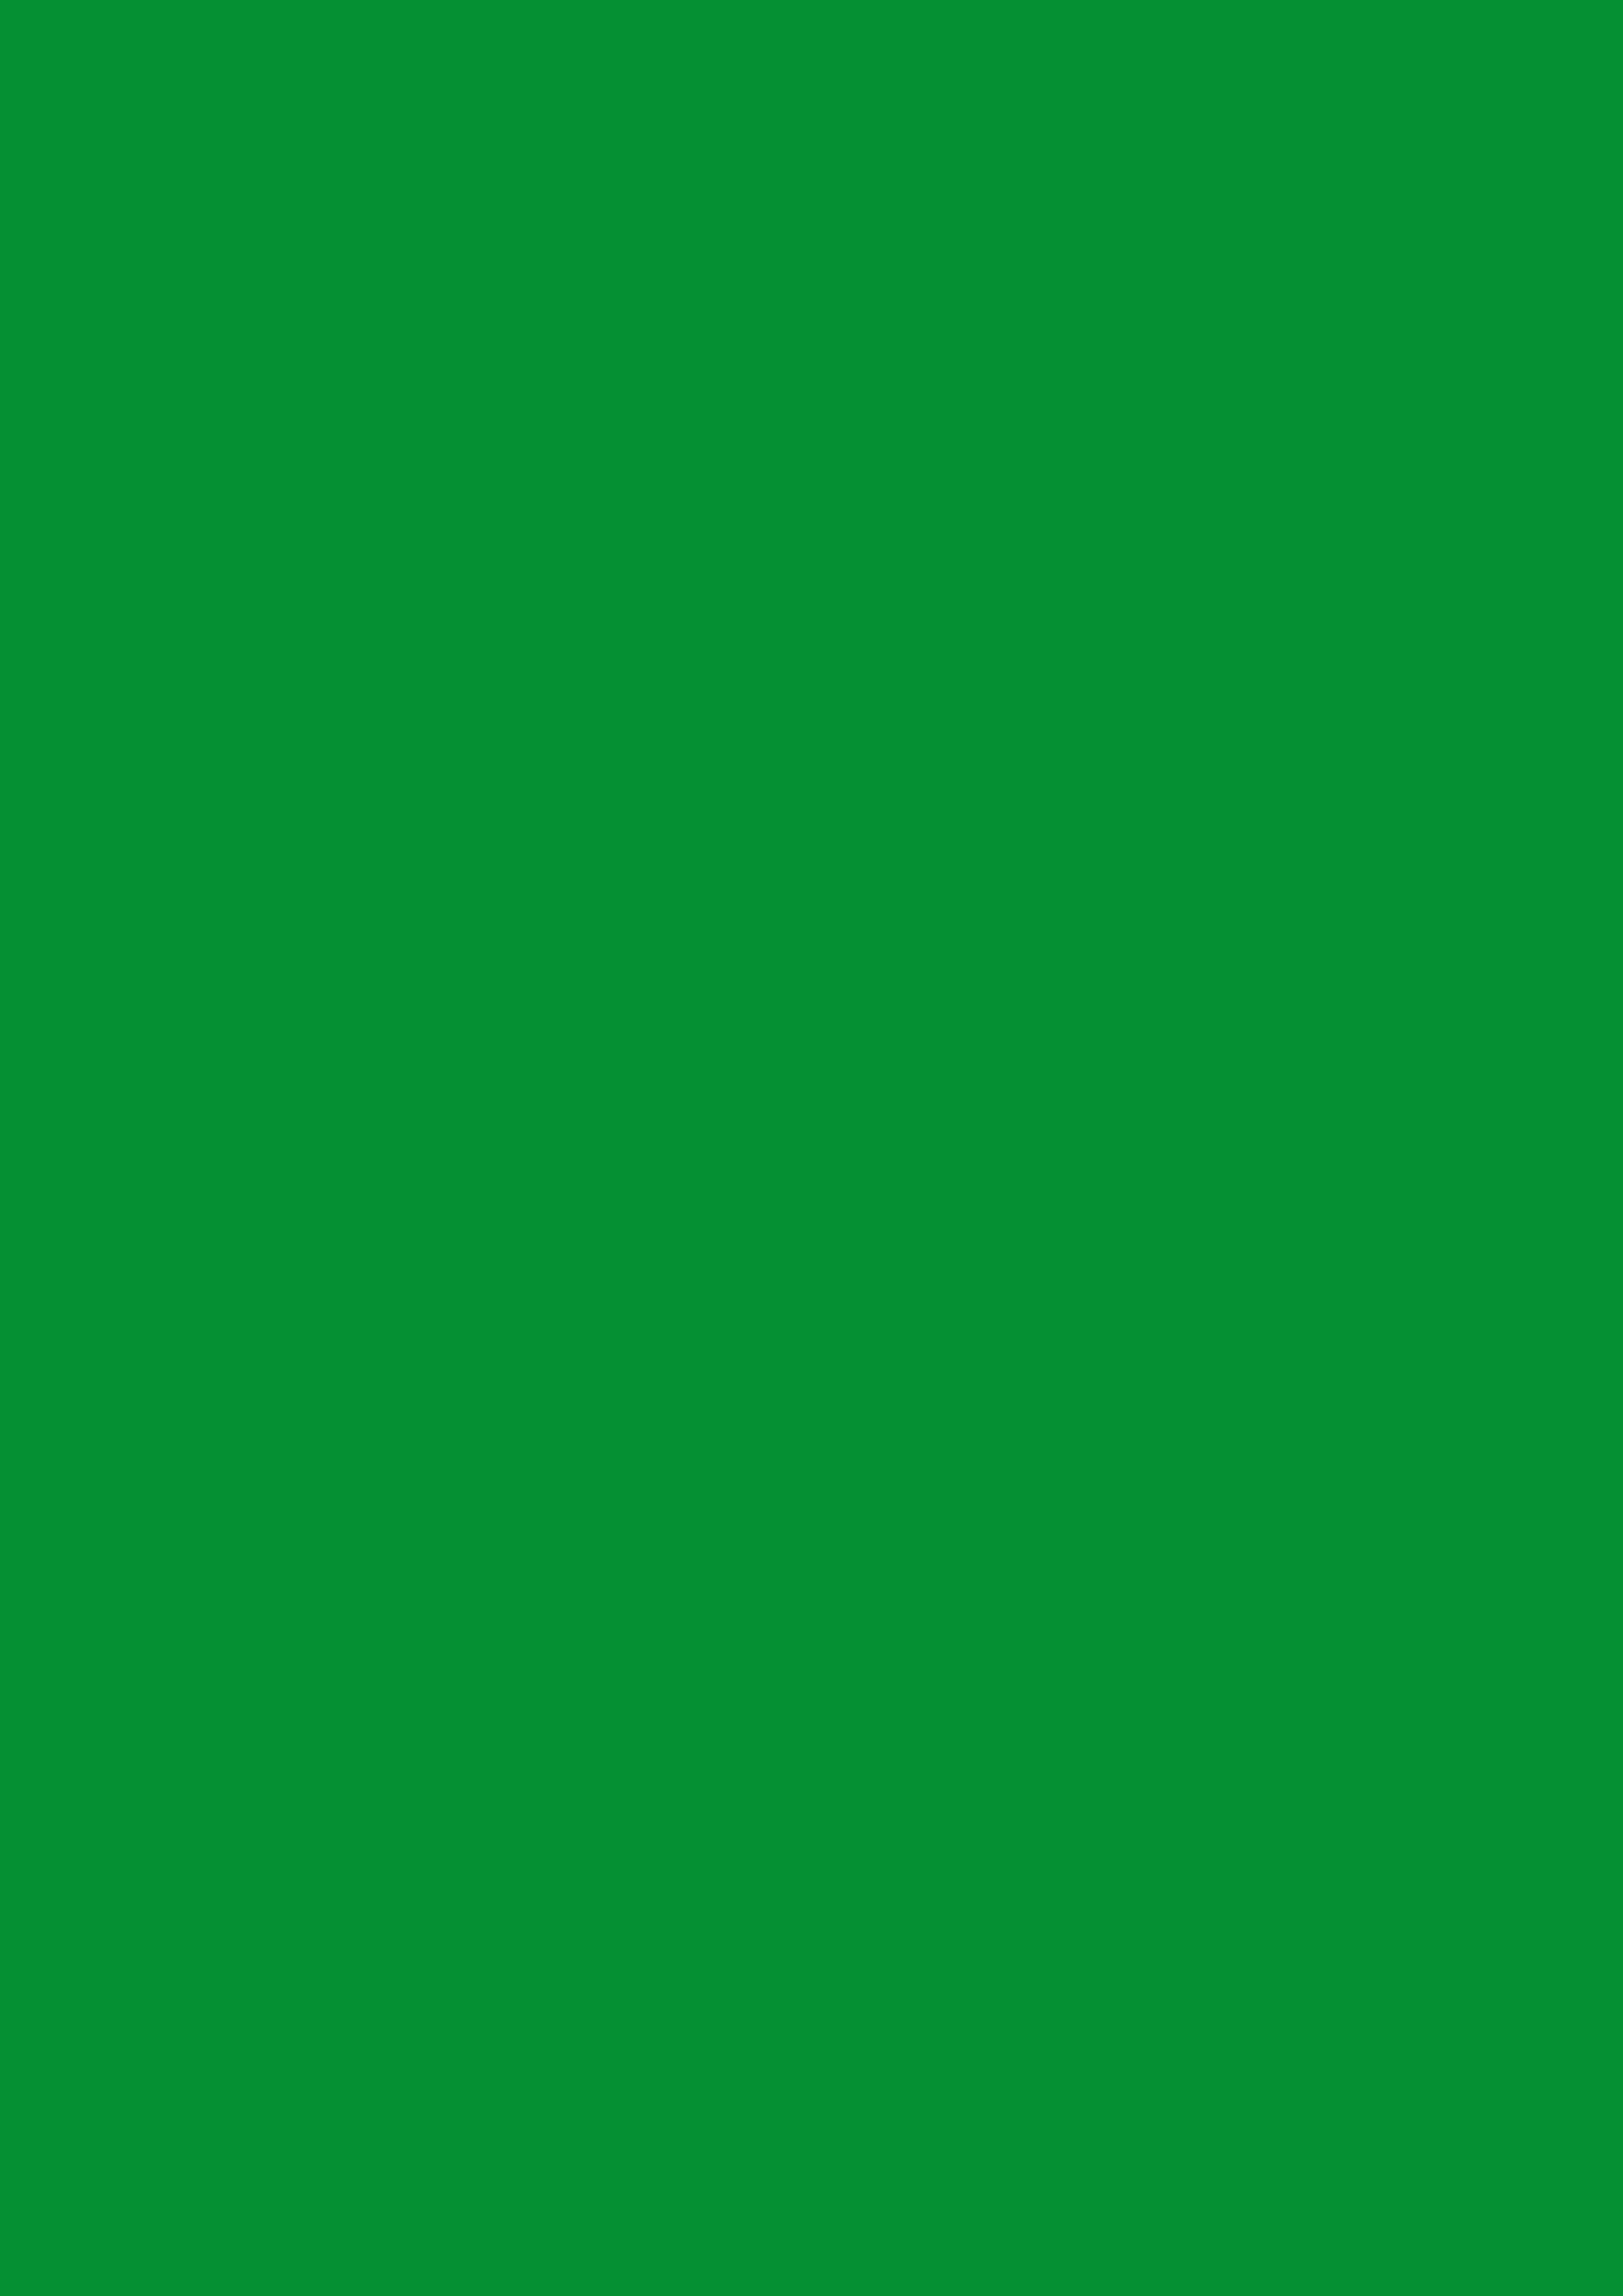 2480x3508 North Texas Green Solid Color Background